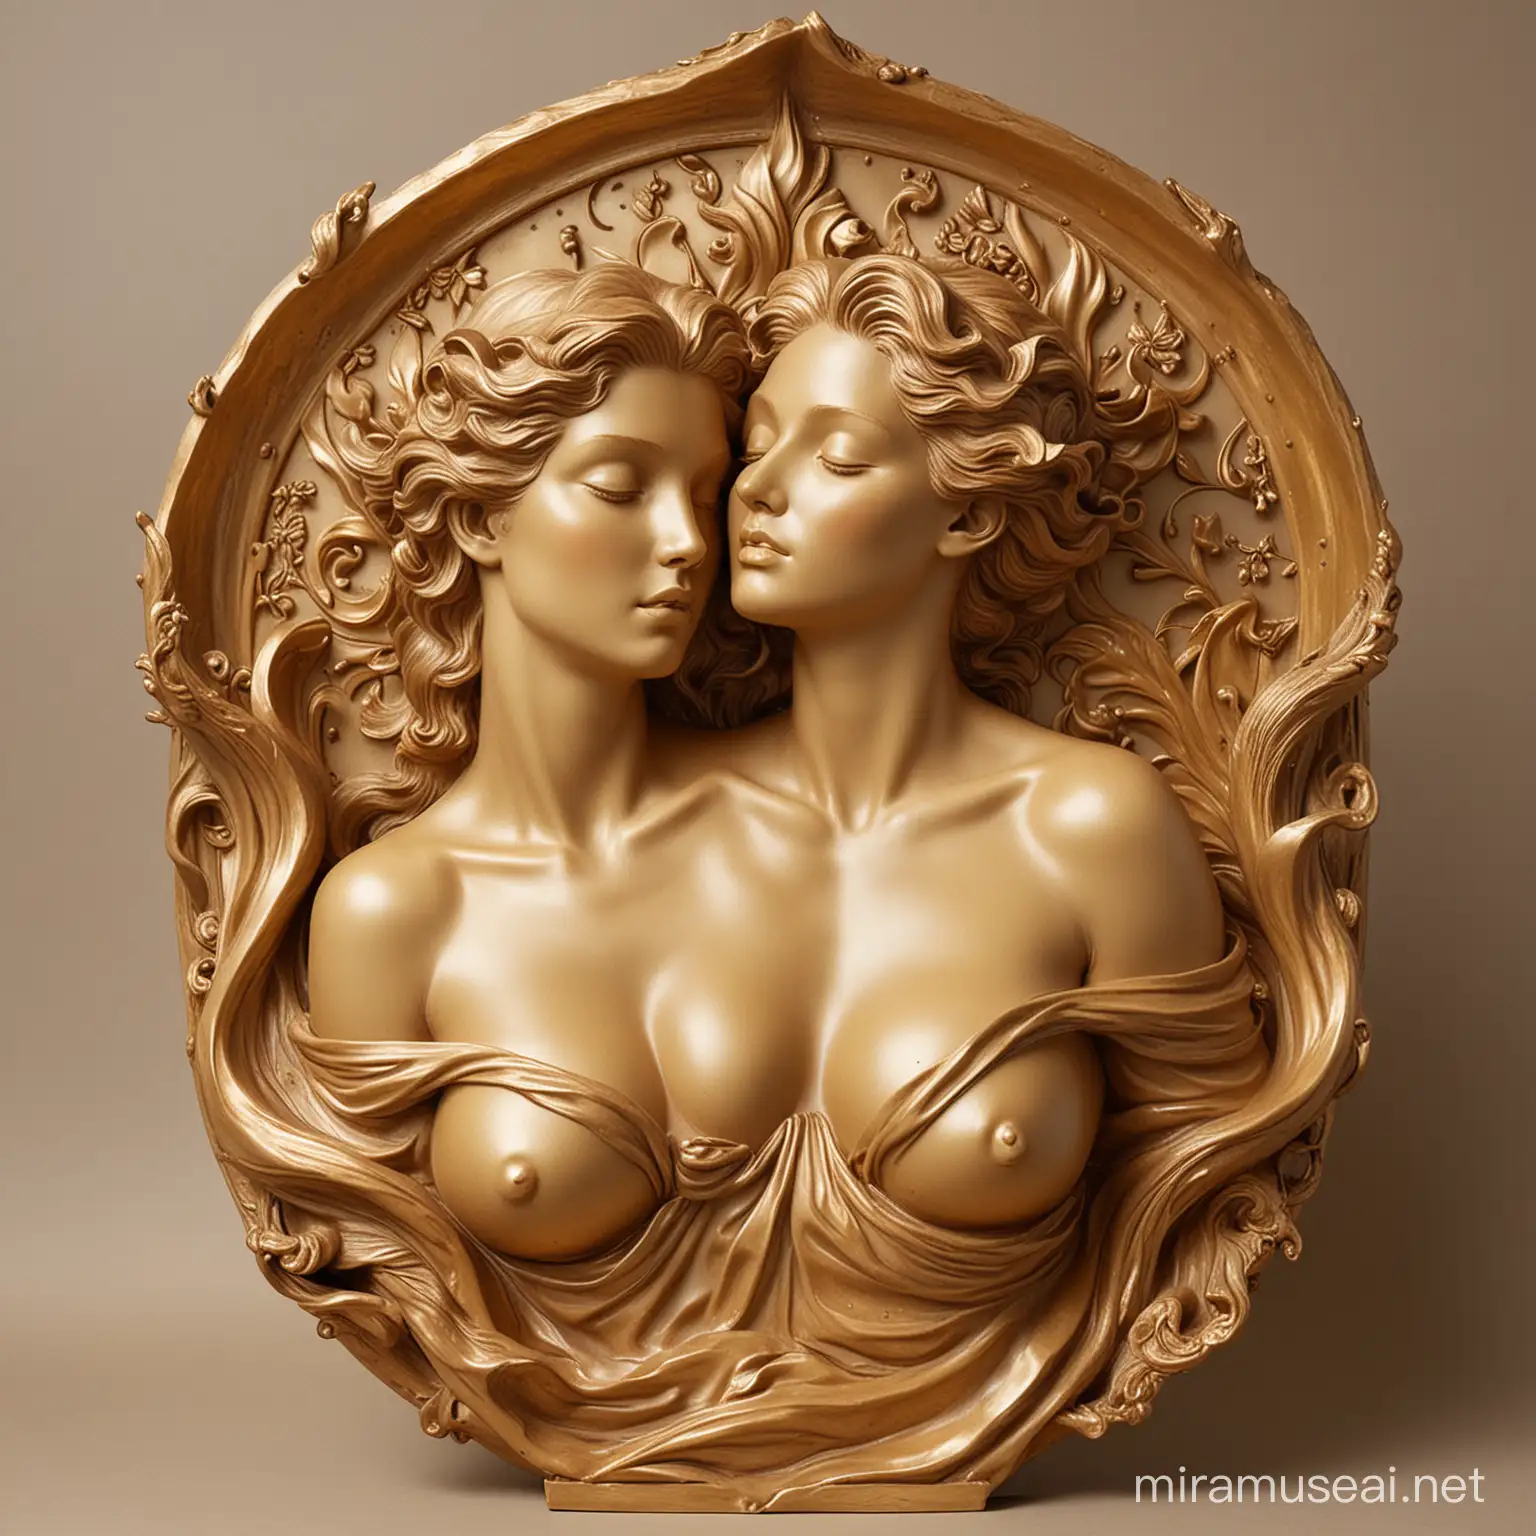 Sensual Figures with Golden Flame Bust Sculpture